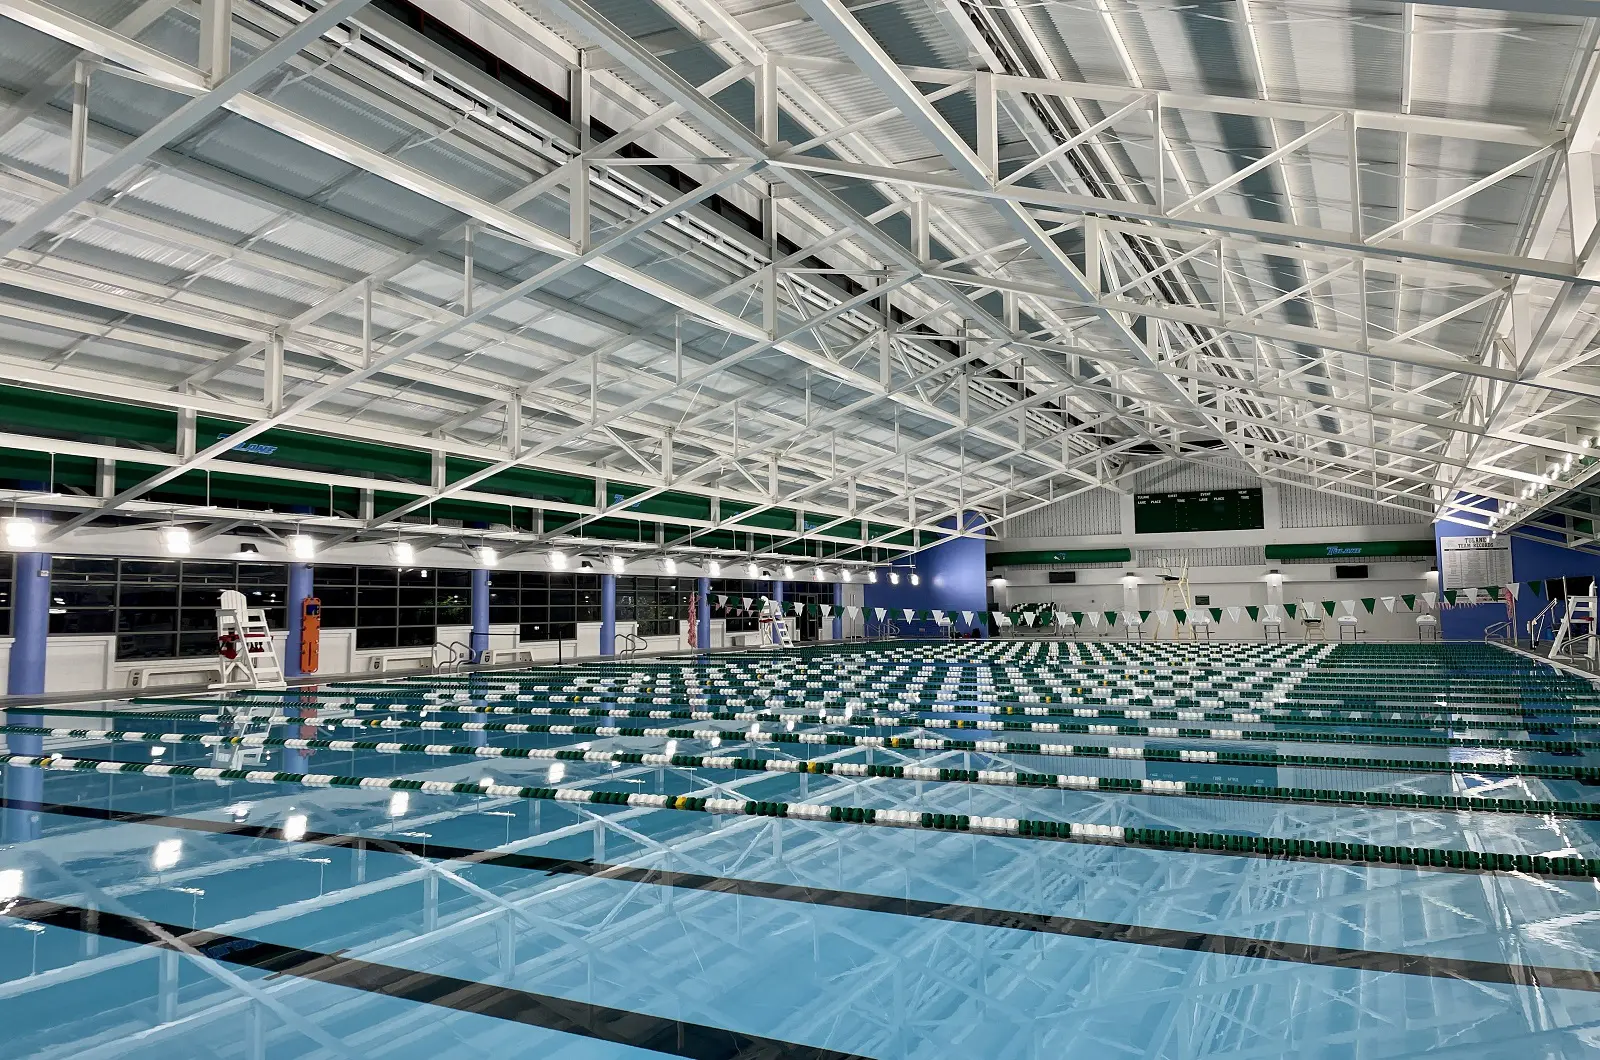 A large swimming pool for athletes